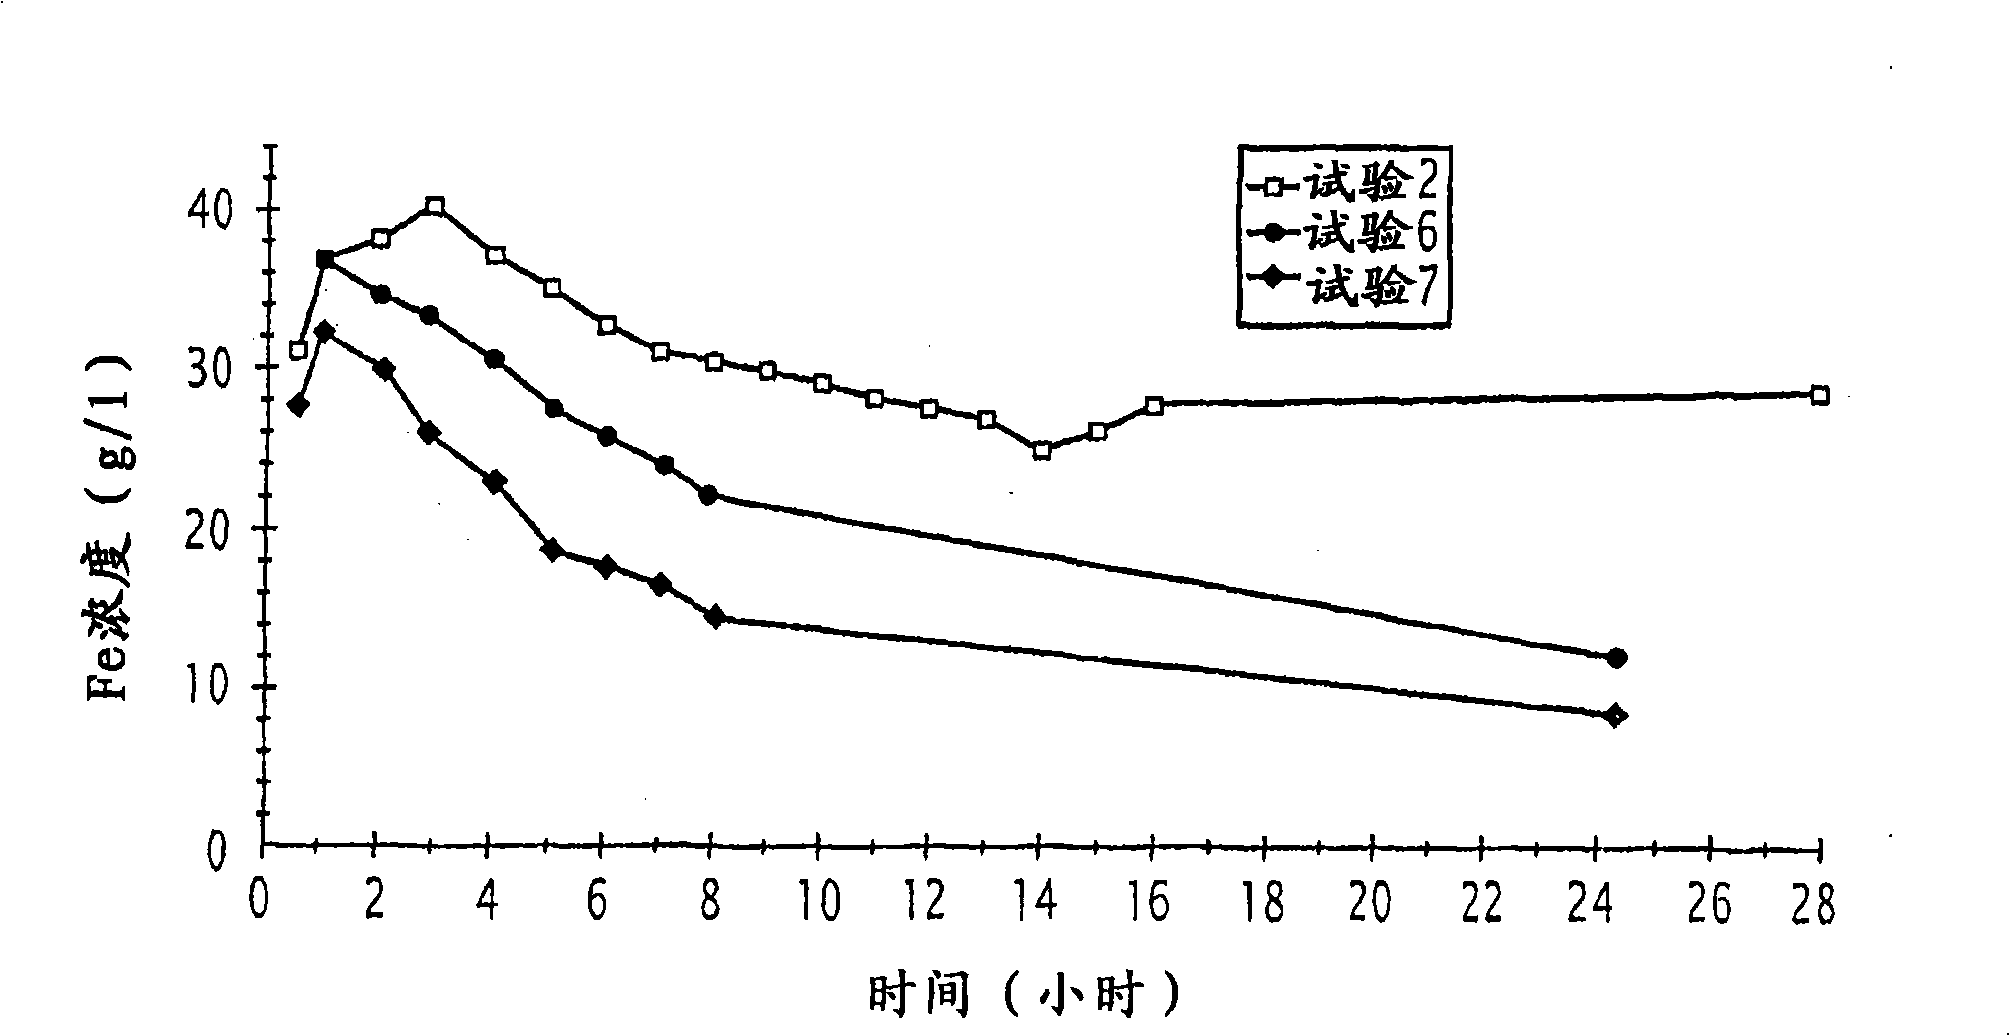 Process for the hydrometallurgical treatment of a lateritic nickel/cobalt ore and process for producing nickel and/or cobalt intermediate concentrates or commercial products using it